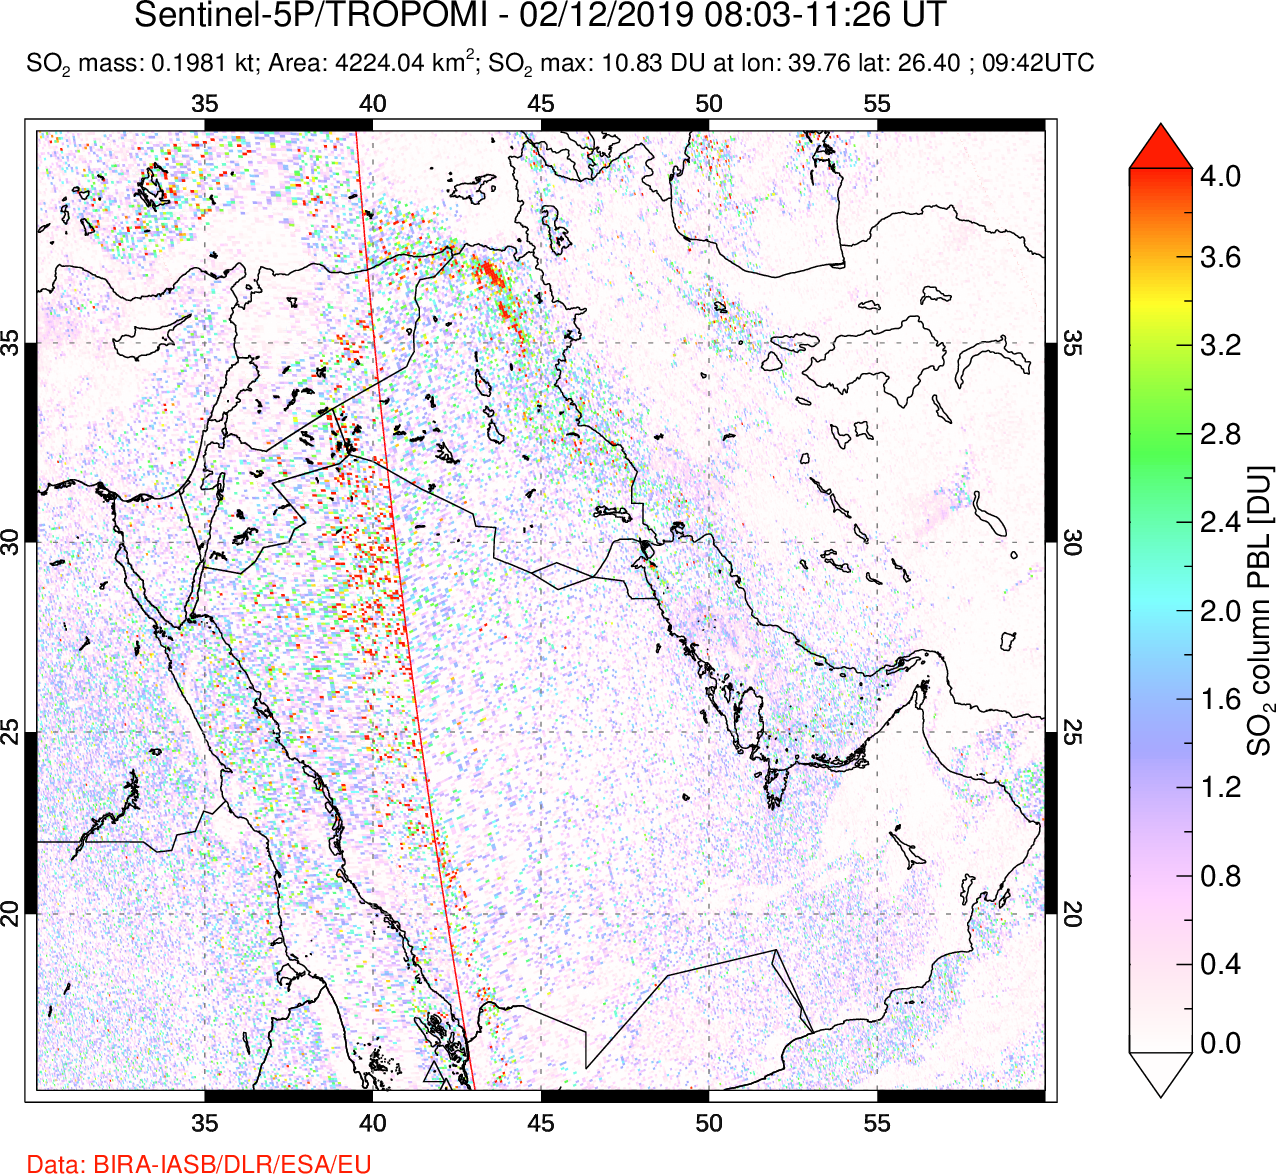 A sulfur dioxide image over Middle East on Feb 12, 2019.